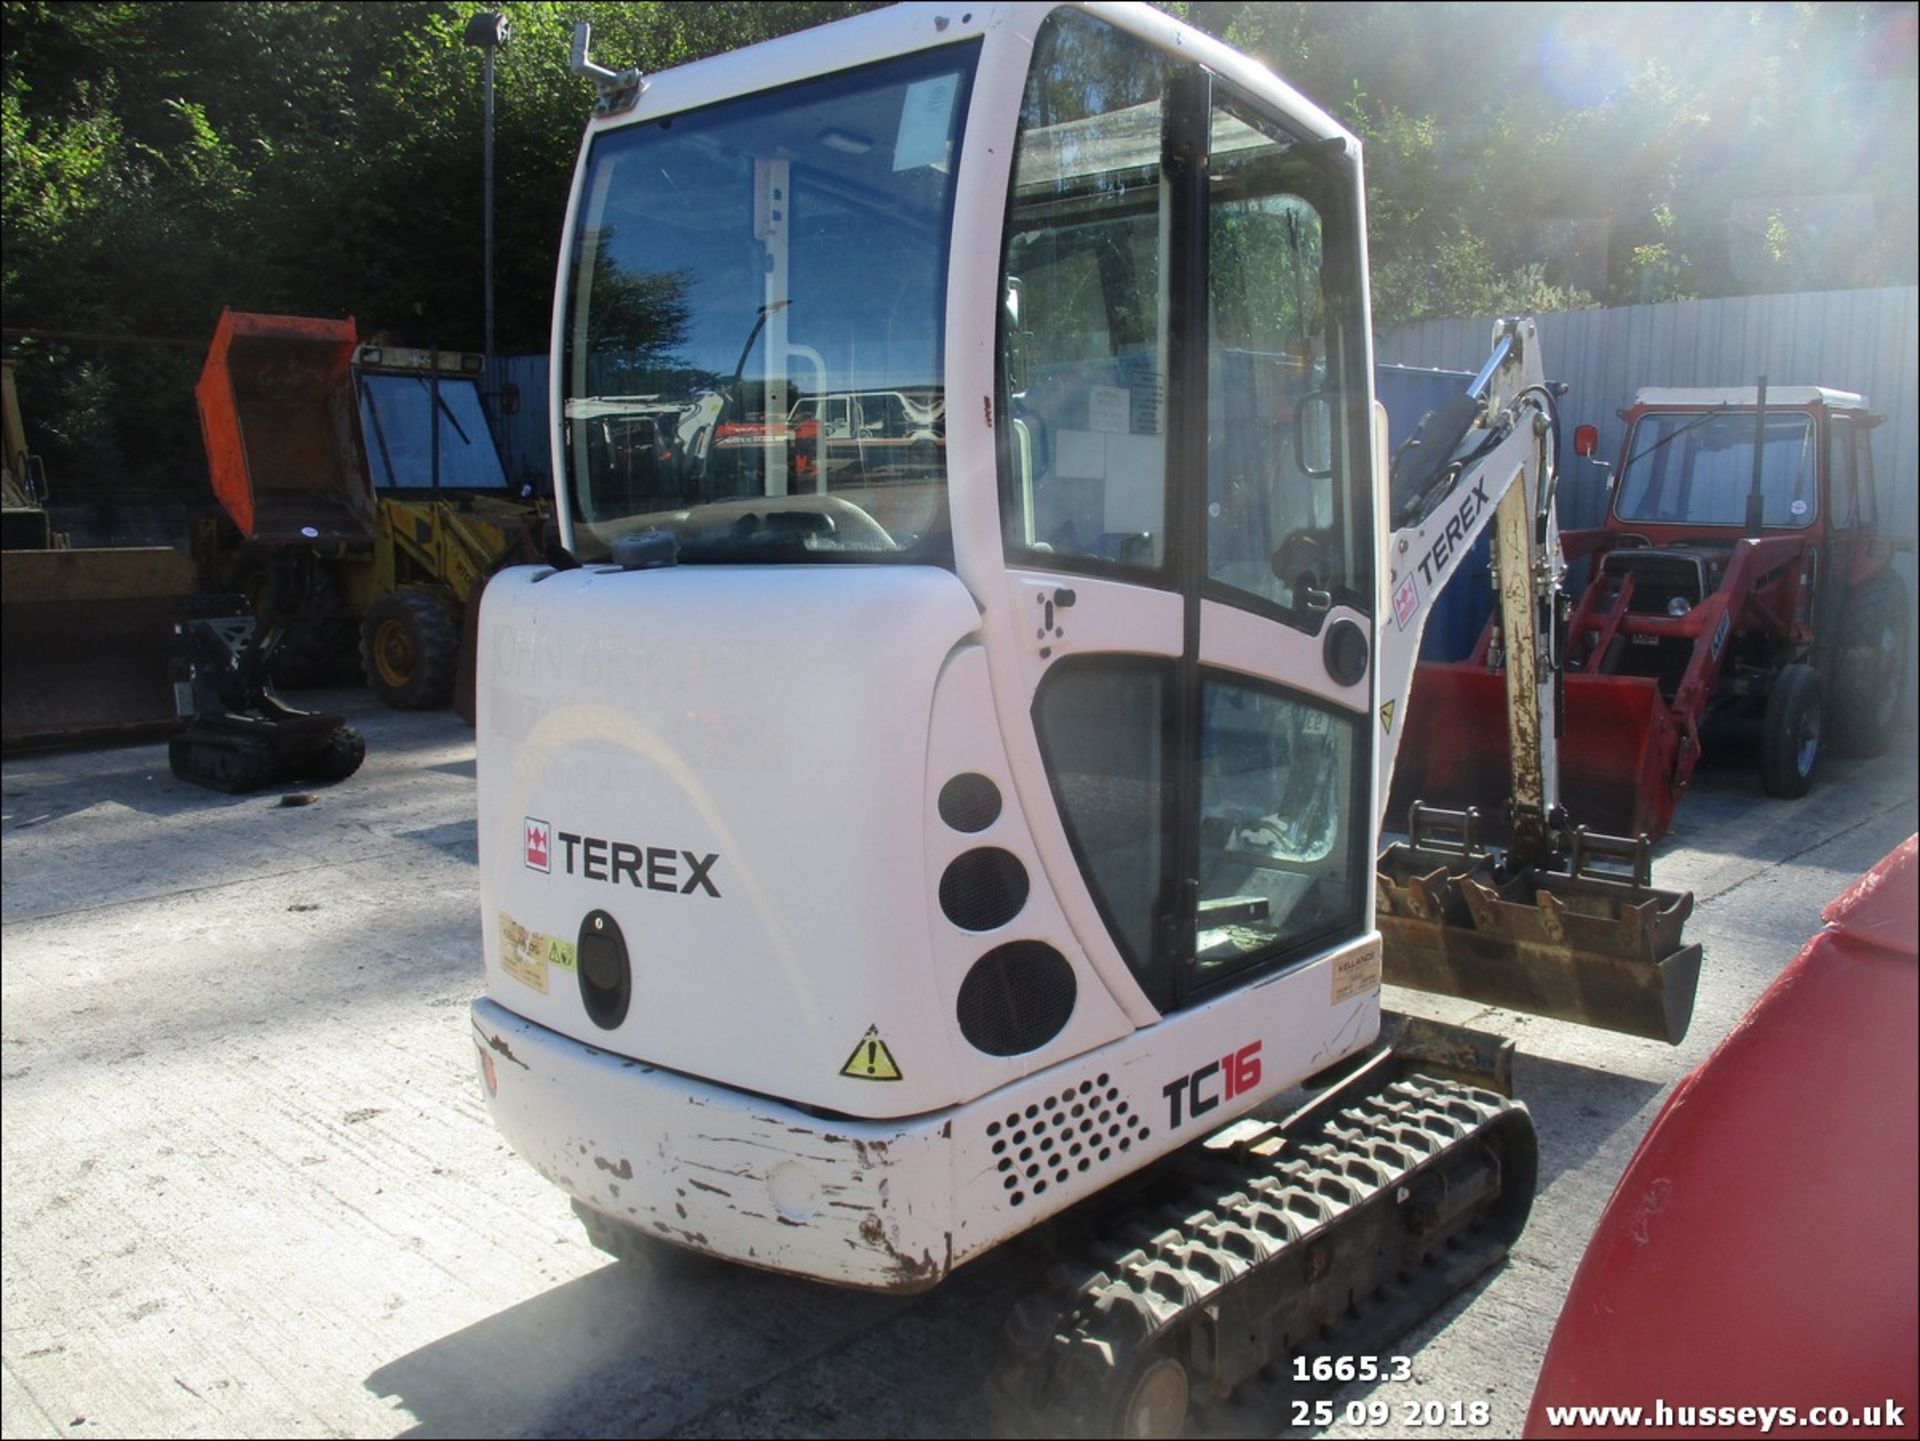 TEREX TX16 C/W 3 BUCKETS. PIPED. 2009. 1575 HRS - Image 4 of 6